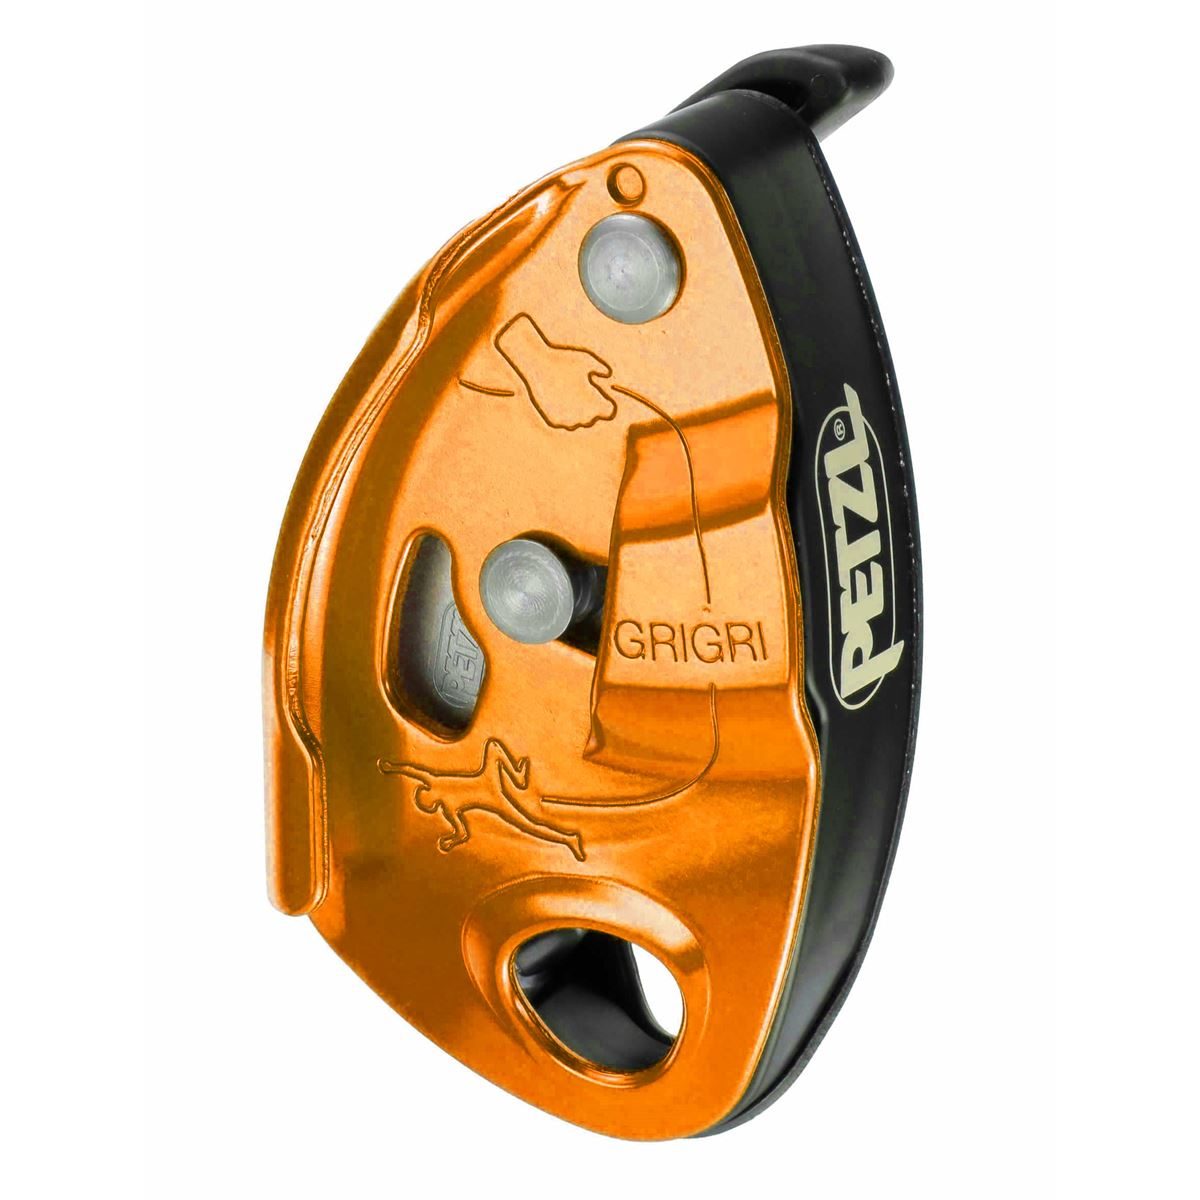 How to use the Petzl GriGri » All Hands Fire Equipment & Training